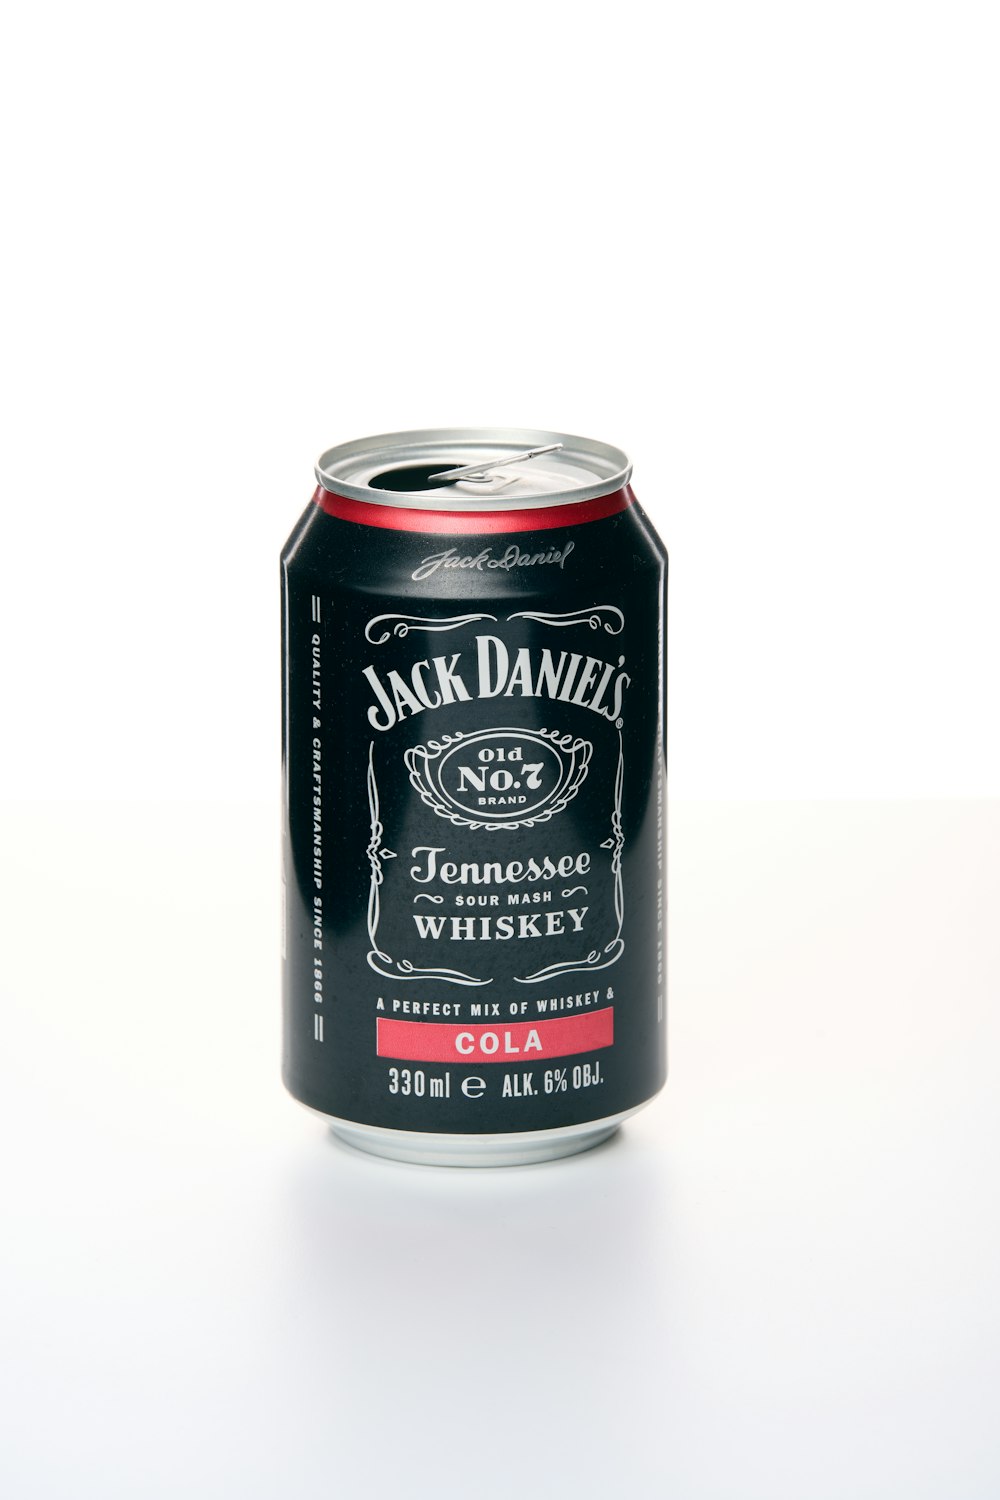 a can of jack daniels on a white surface